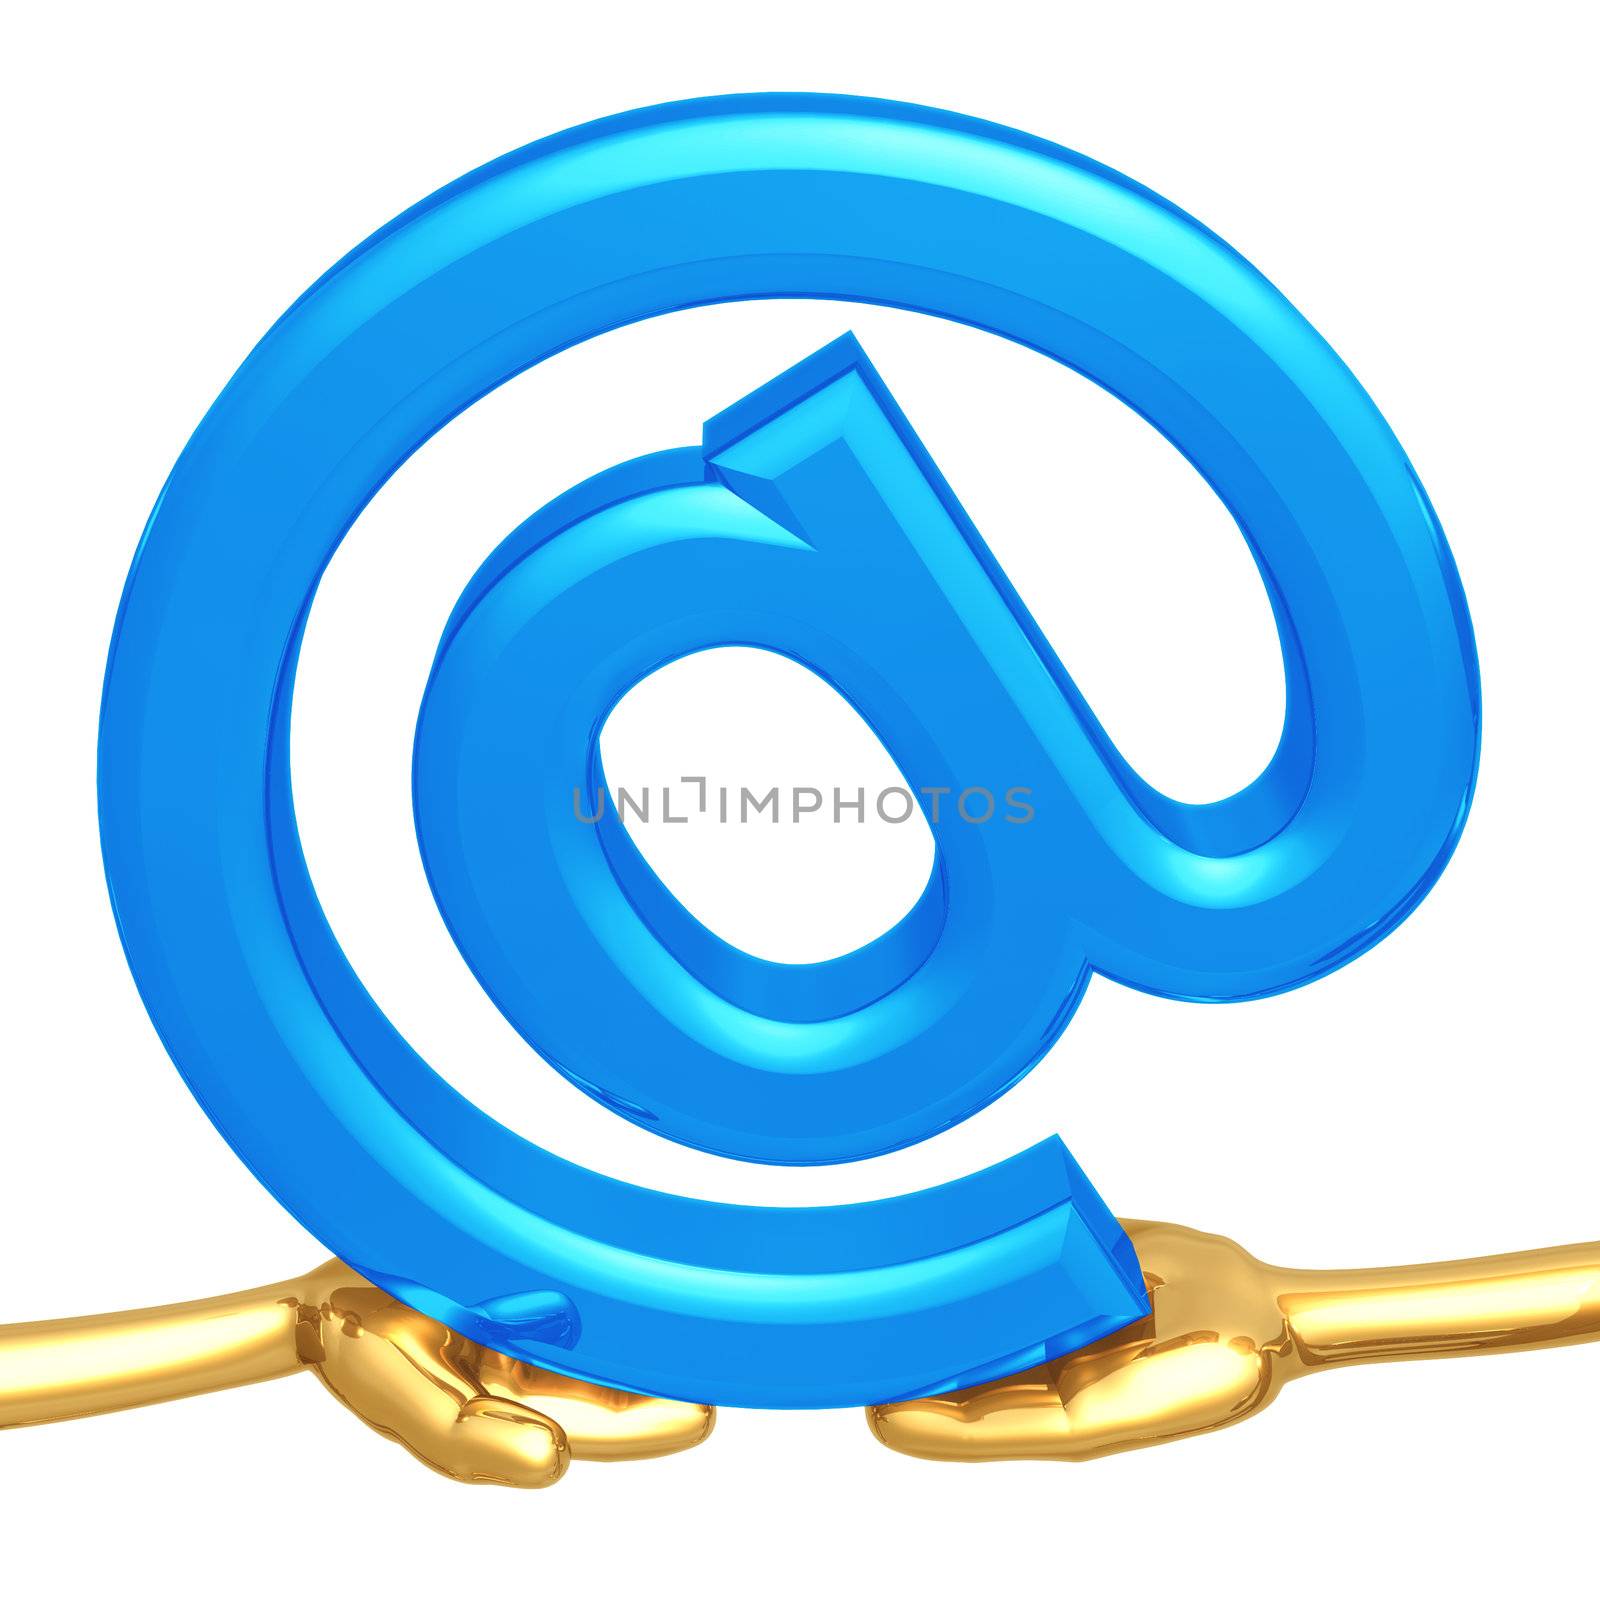 Shared Email Symbol by LuMaxArt